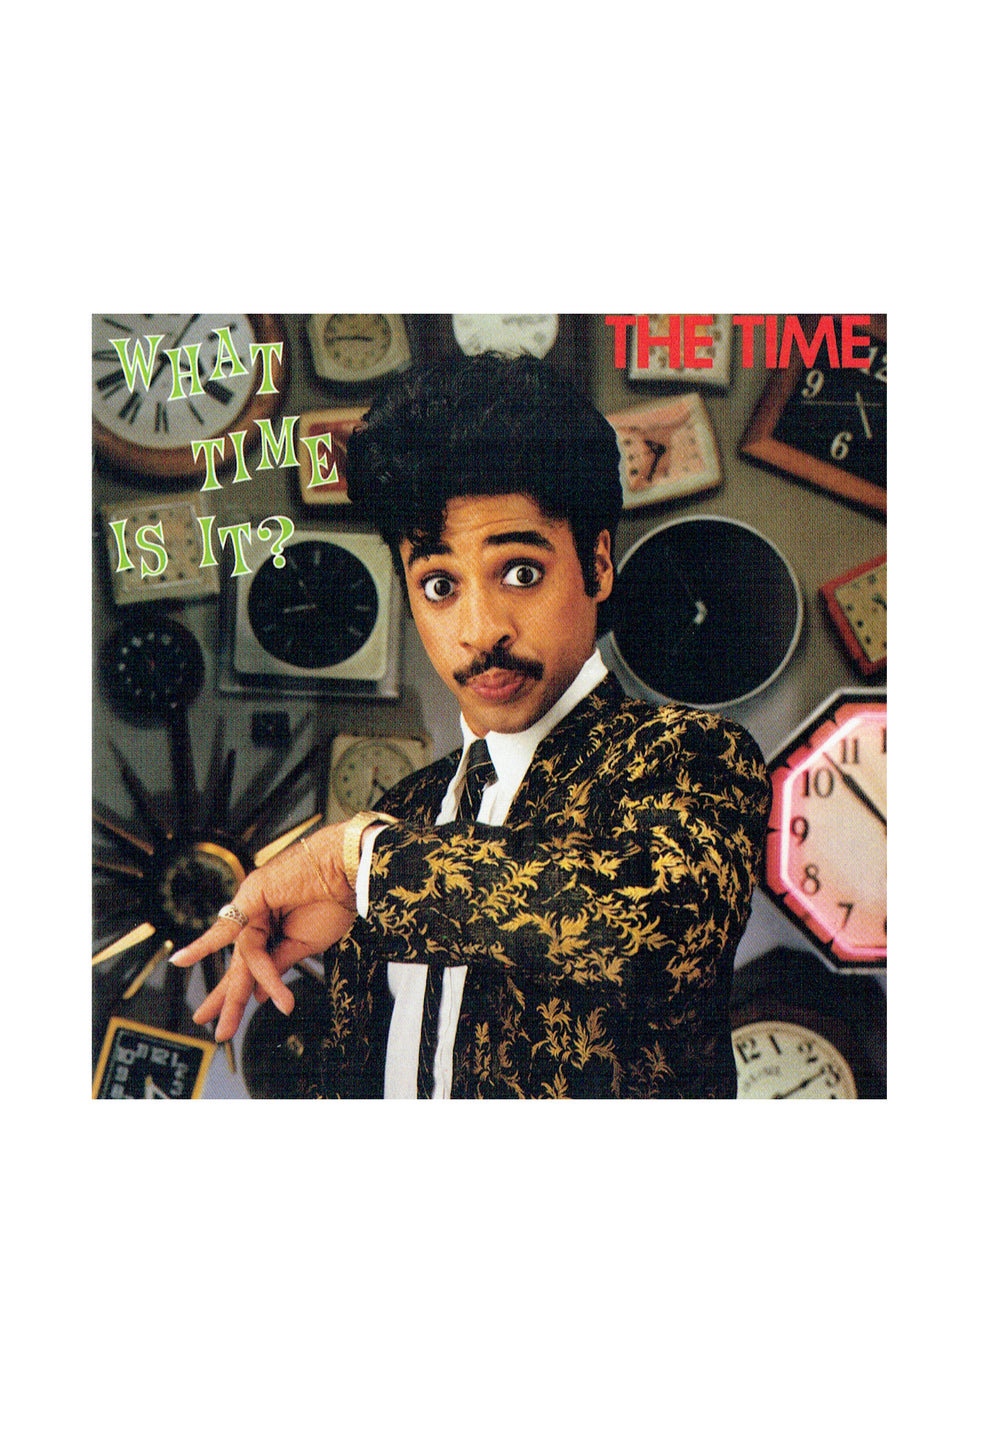 Prince – The Time What Time Is It ? USA CD Album 6 Tracks 1982 Prince  EX / MINT